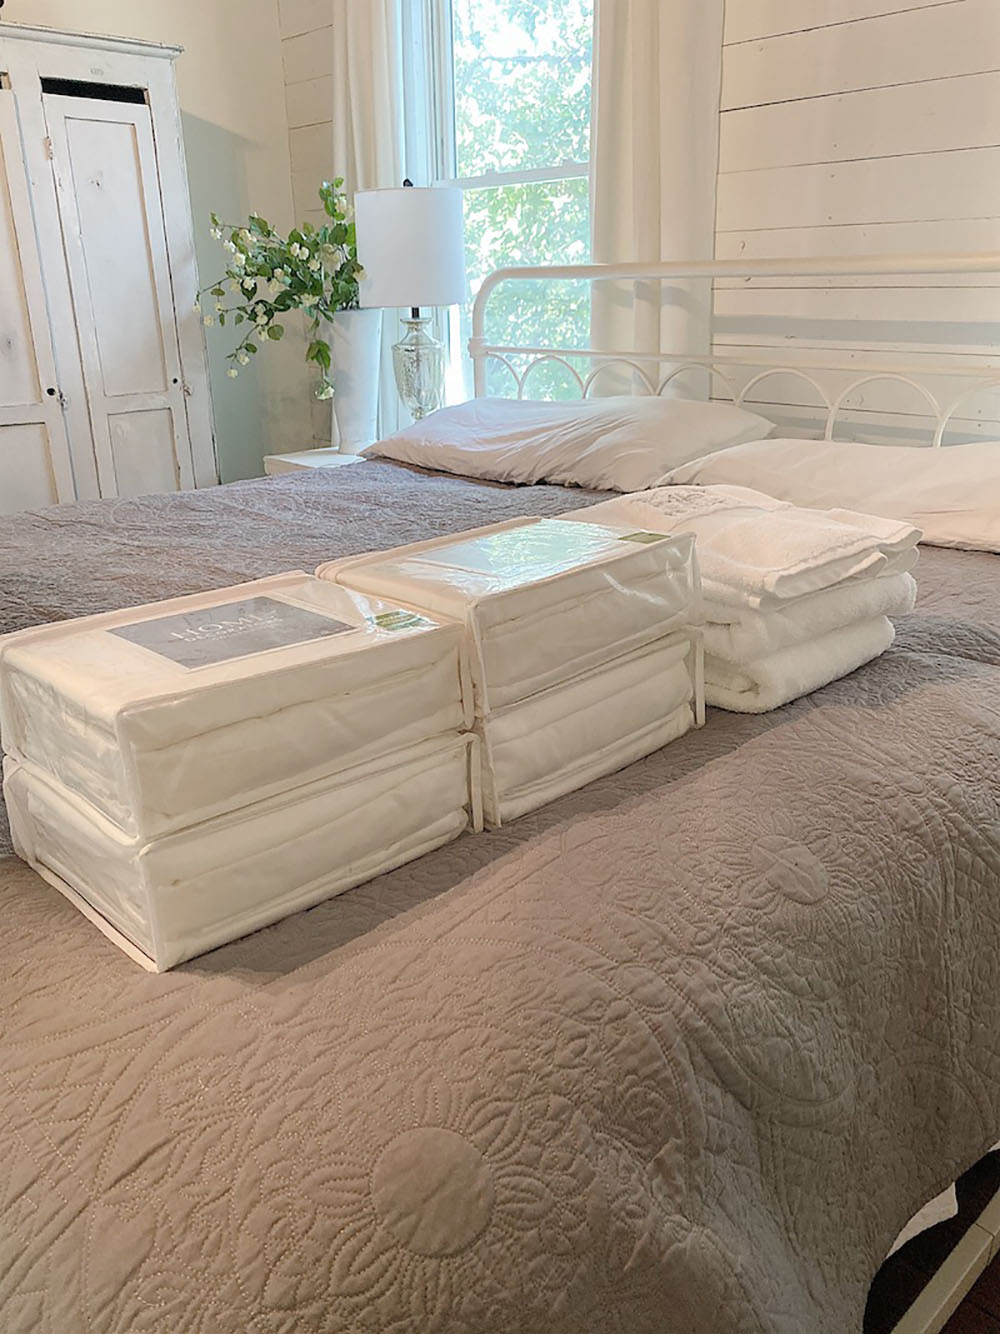 A group of sheet sets and towels sitting on top of gray bedding.